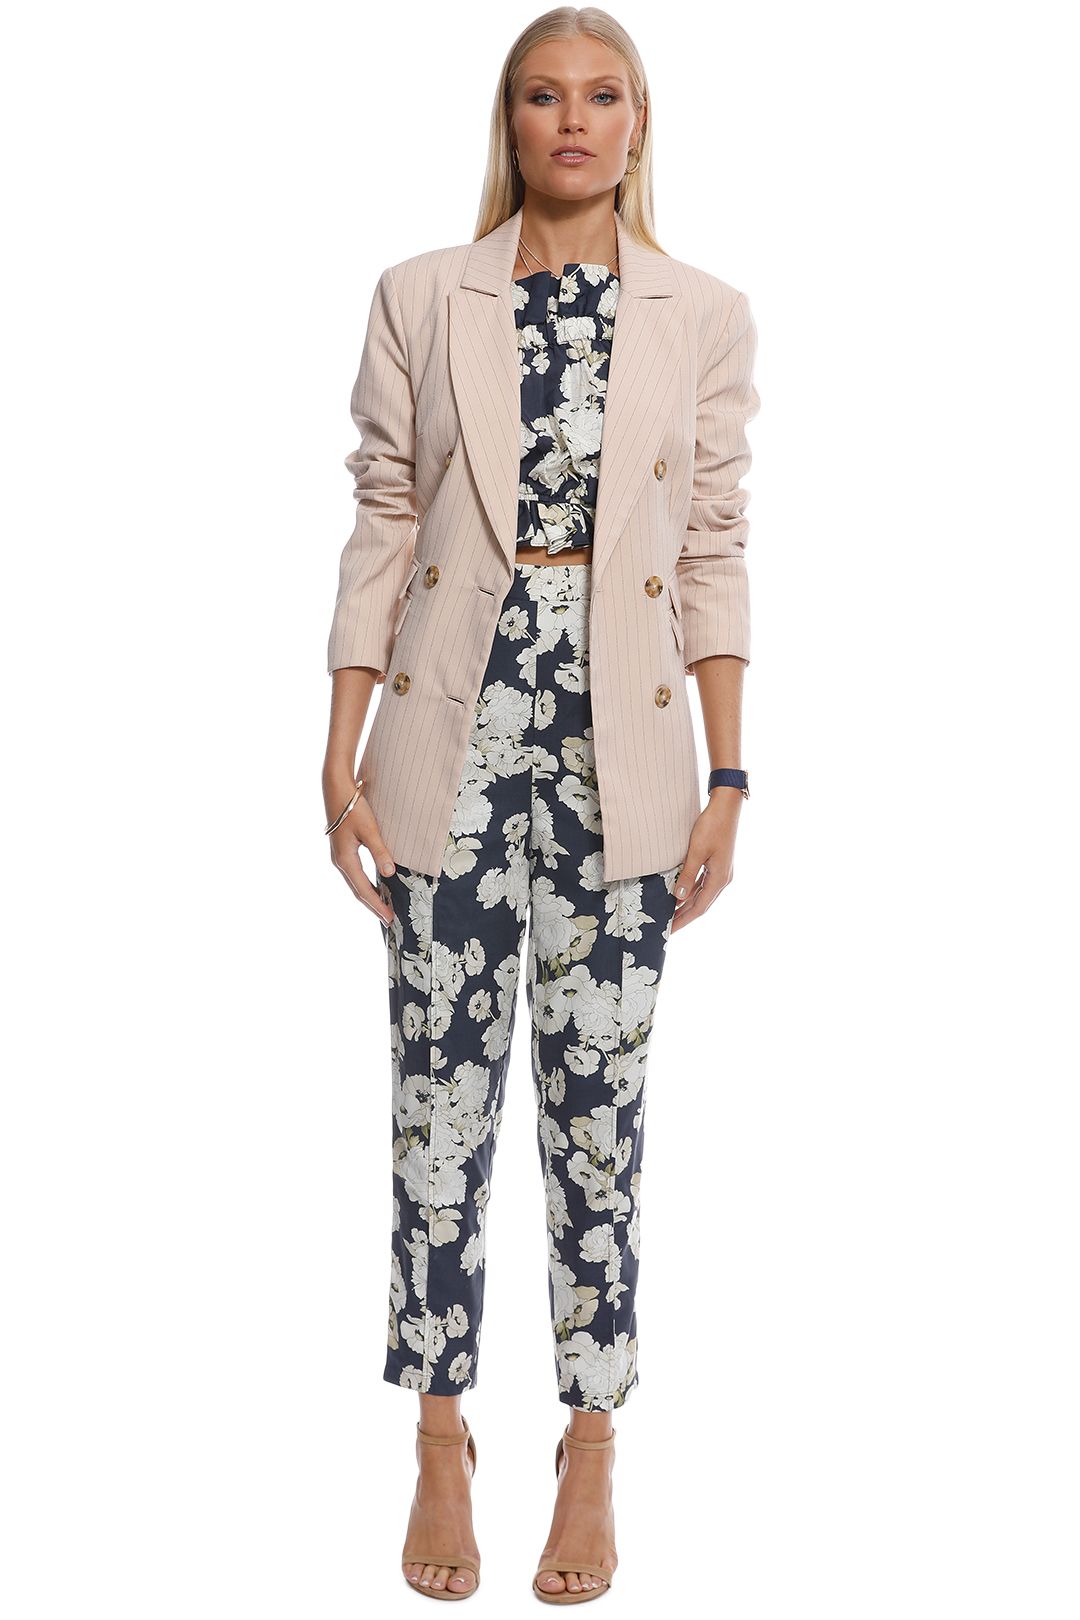 CMEO Collective - Go From Here Blazer - Nude - Front